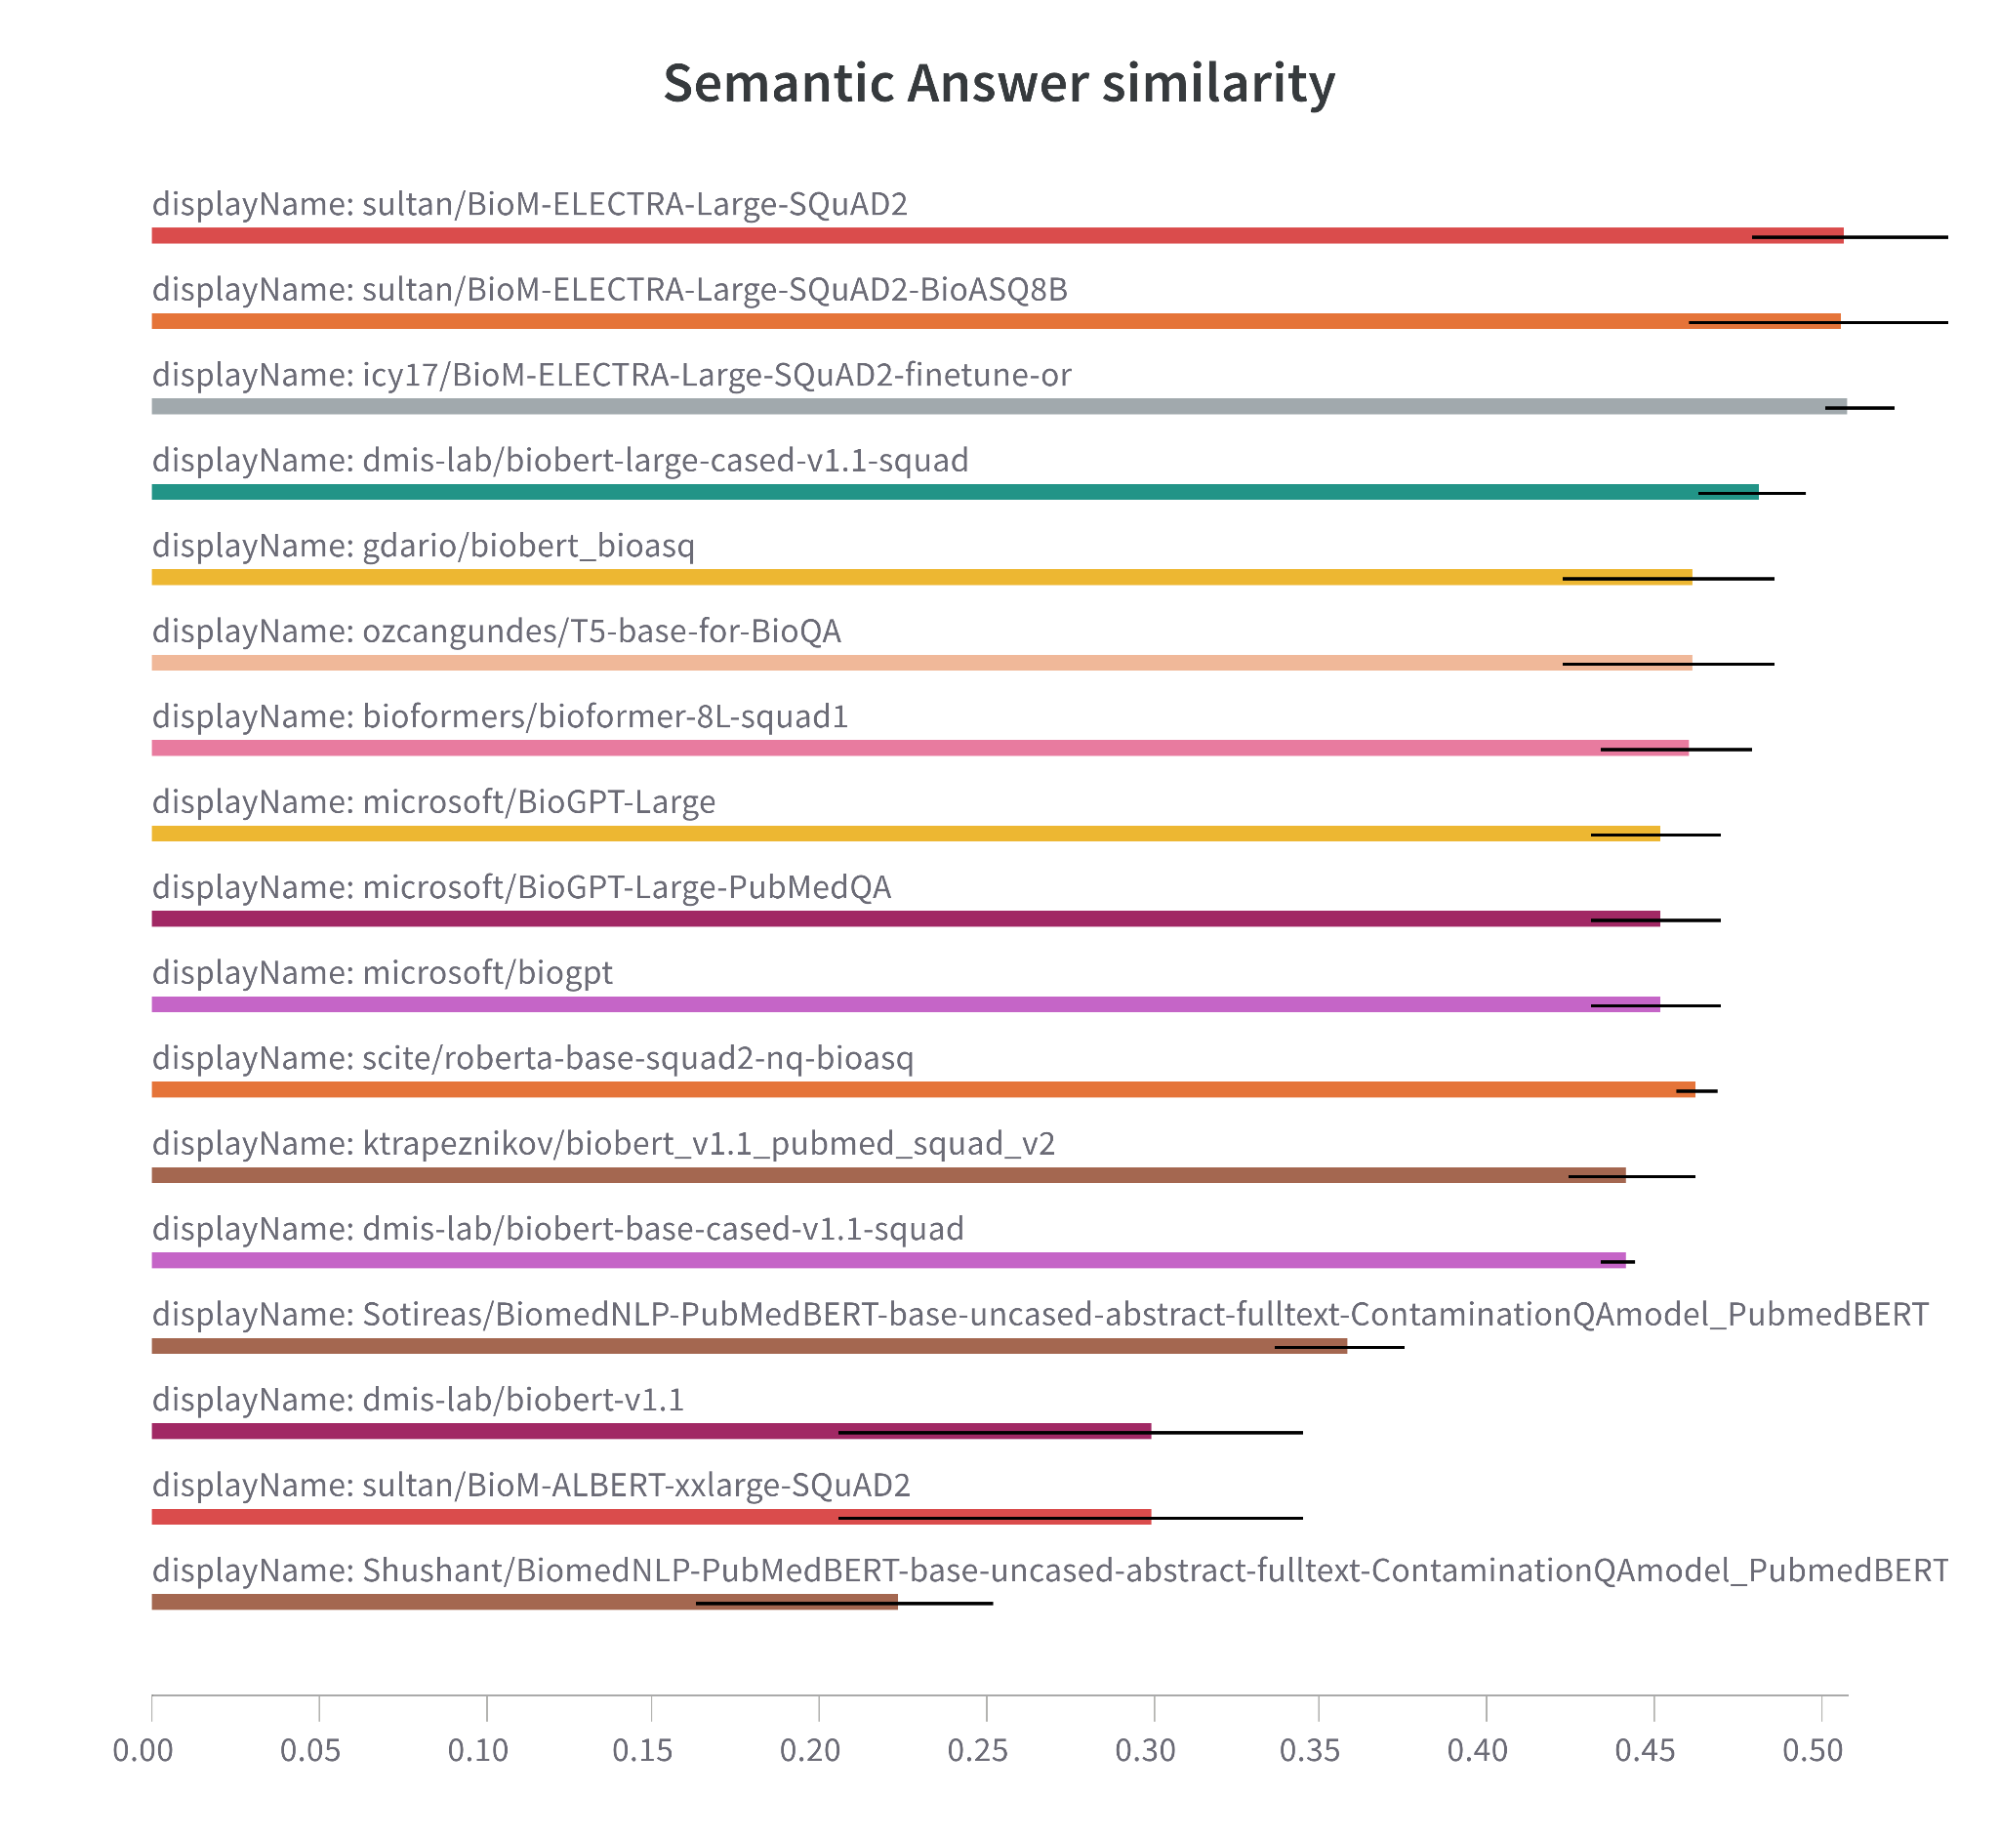 Semantic Answer Similarity Comparison Bar Chart for Models trained on bio data